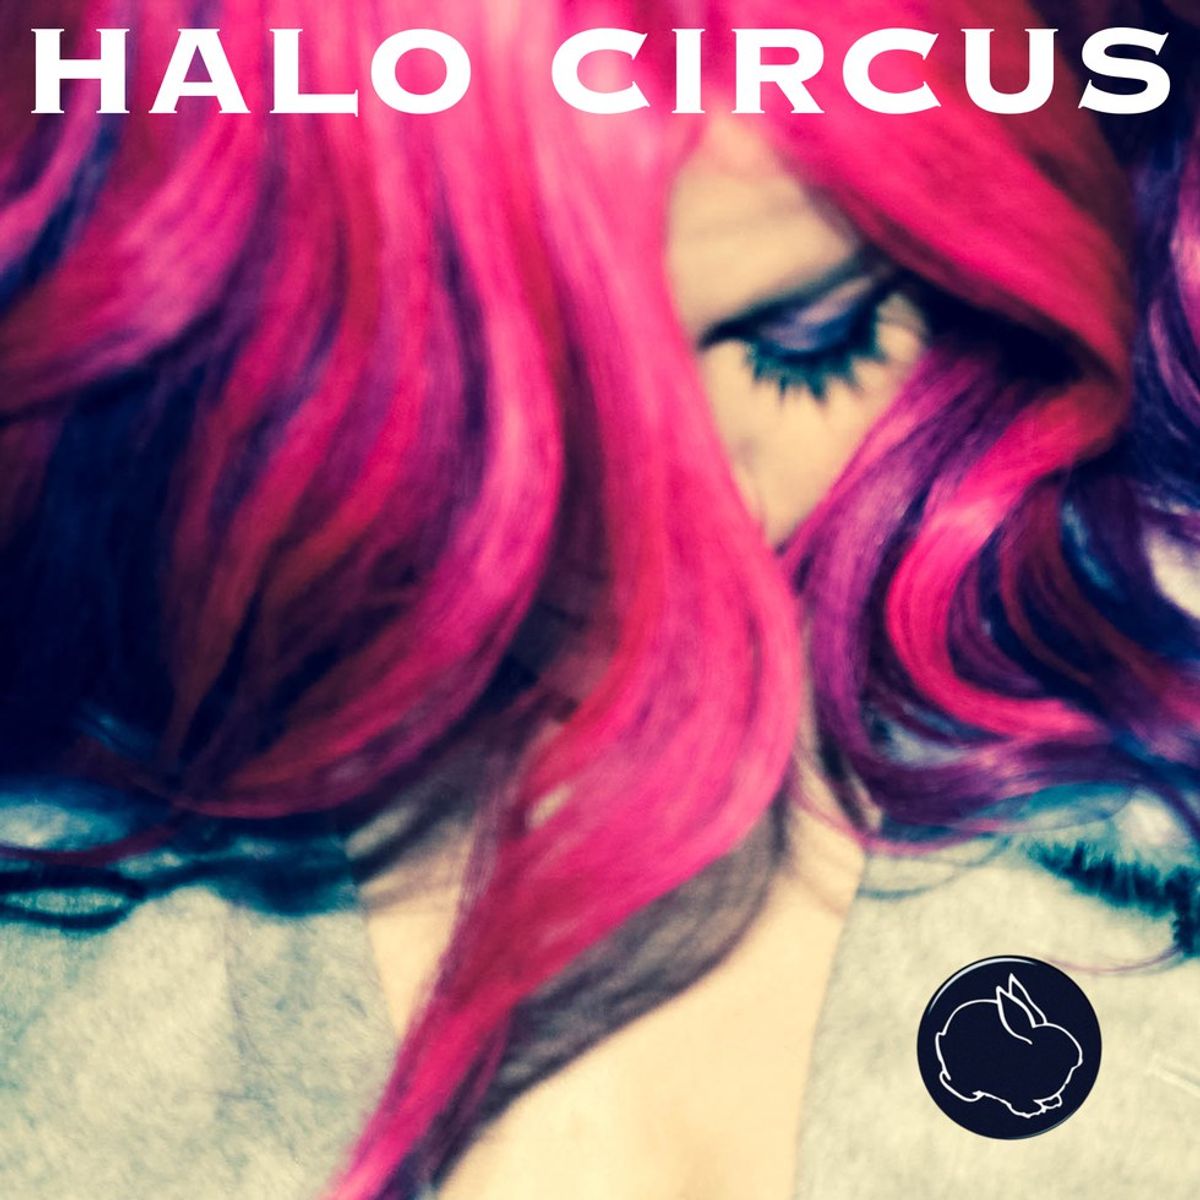 Review of Halo Circus' New Album "Bunny"